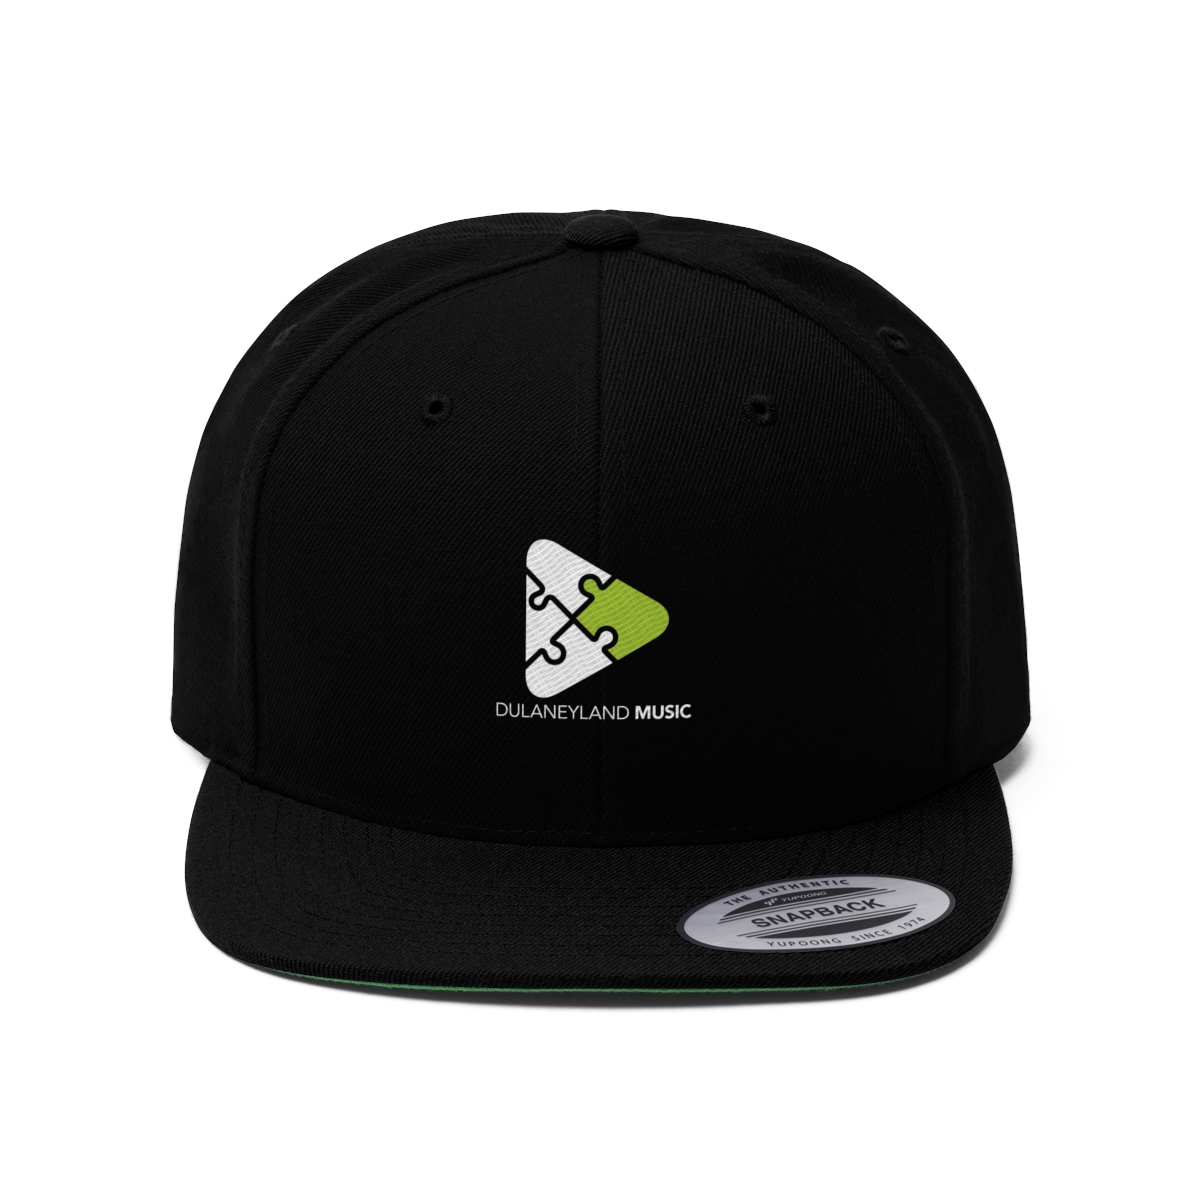 Copy of The Journey Continues Tour Snapback product main image